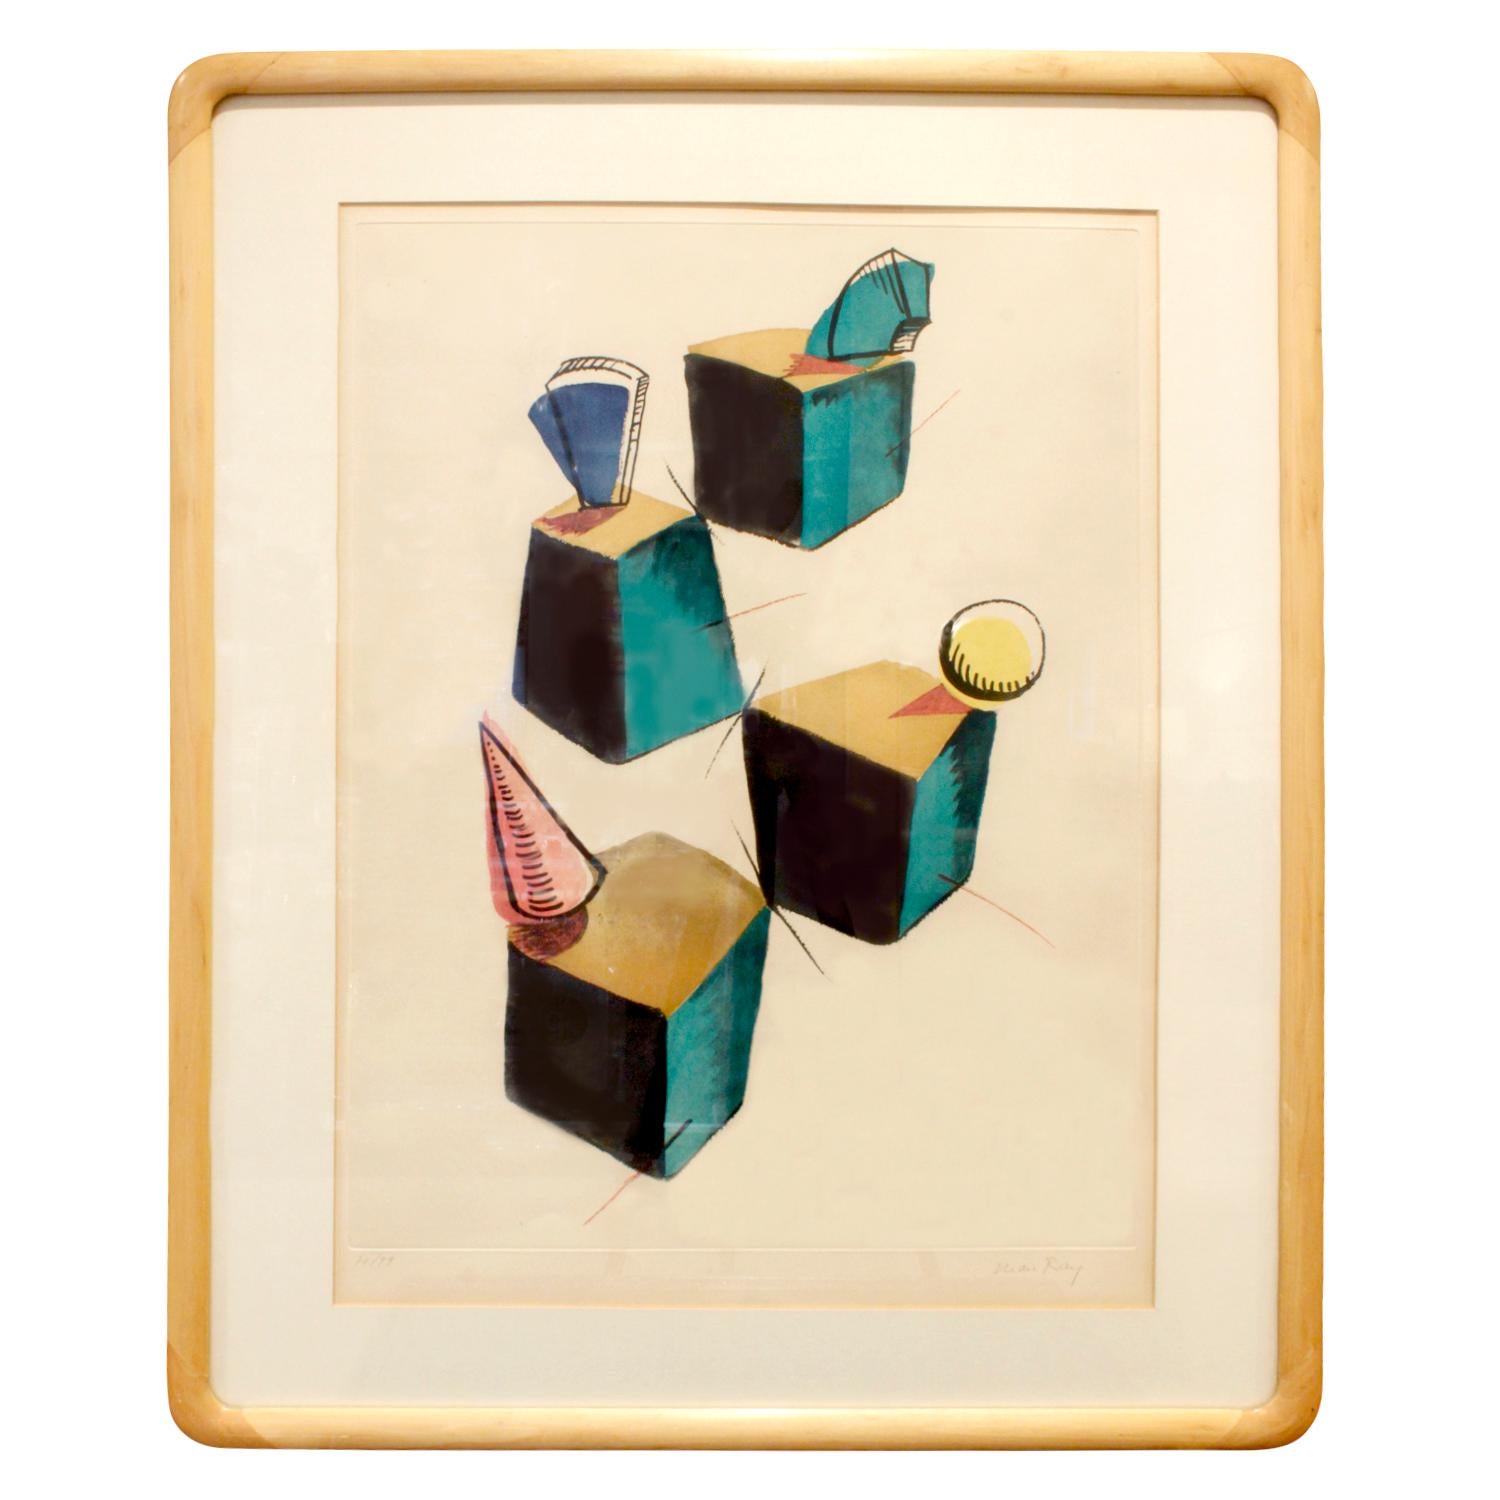 Man Ray Lithograph with Geometric Motif, 1960s 'Signed'